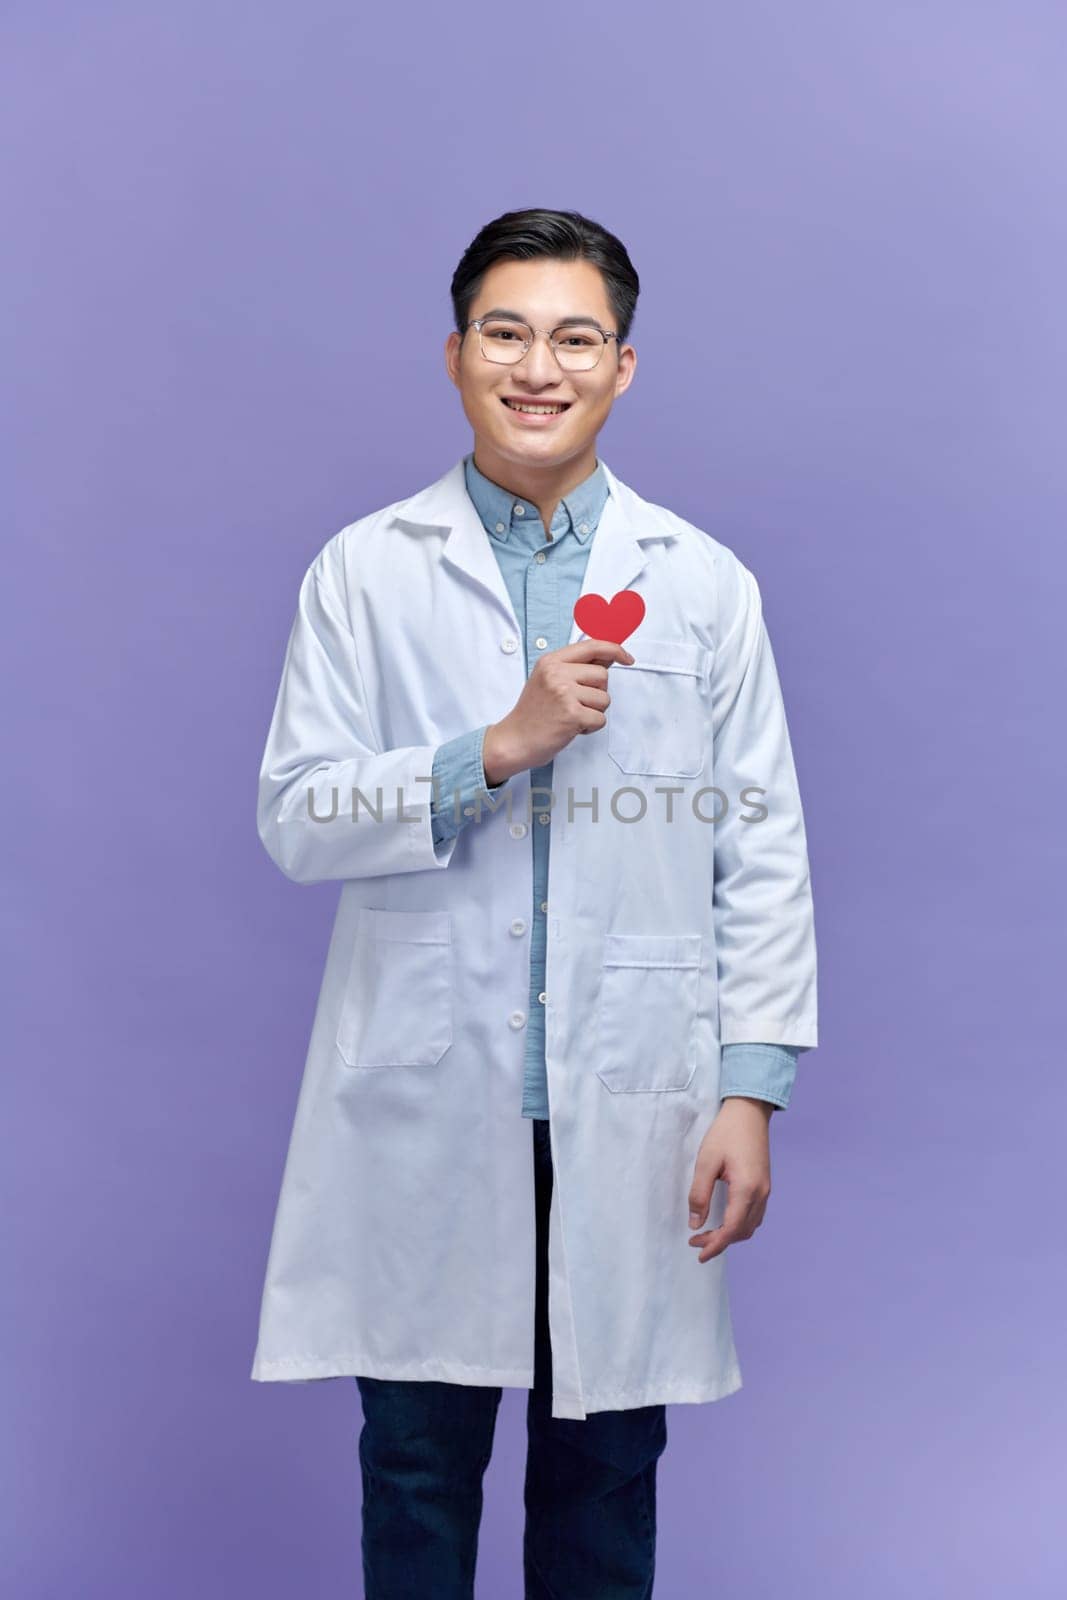 doctor holding red heart shape agains purple background by makidotvn